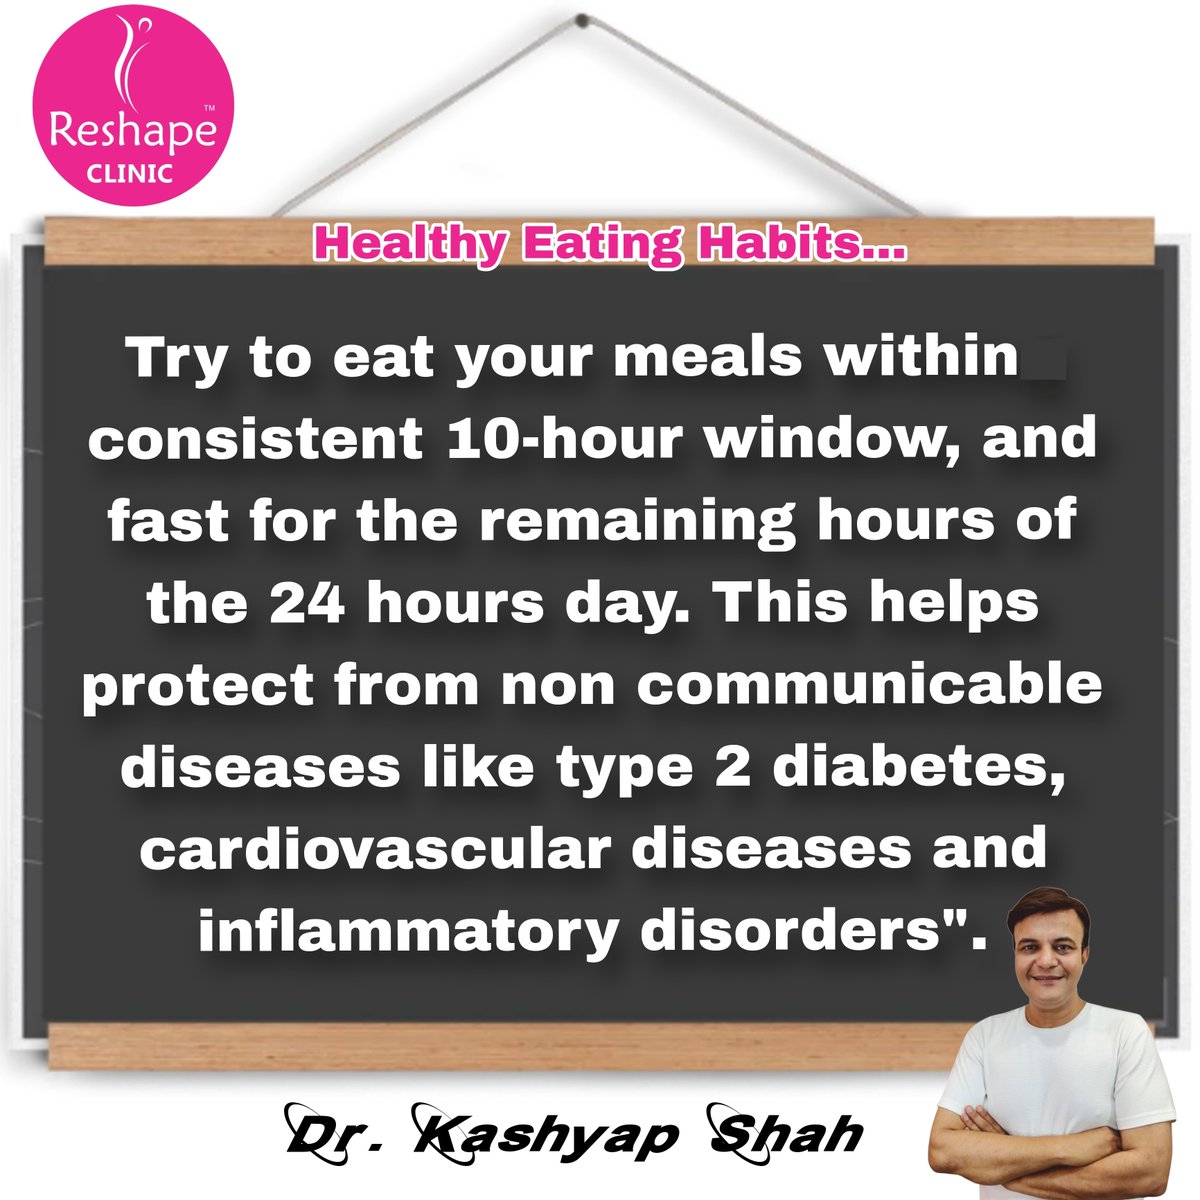 Eat within 10 hours window period and Stay Healthy...
.
.
.
.
.
#healthyeating #diet #ReShapeClinic #drkashyapshah #bhiwandikar #10hours #eatwelllivewell